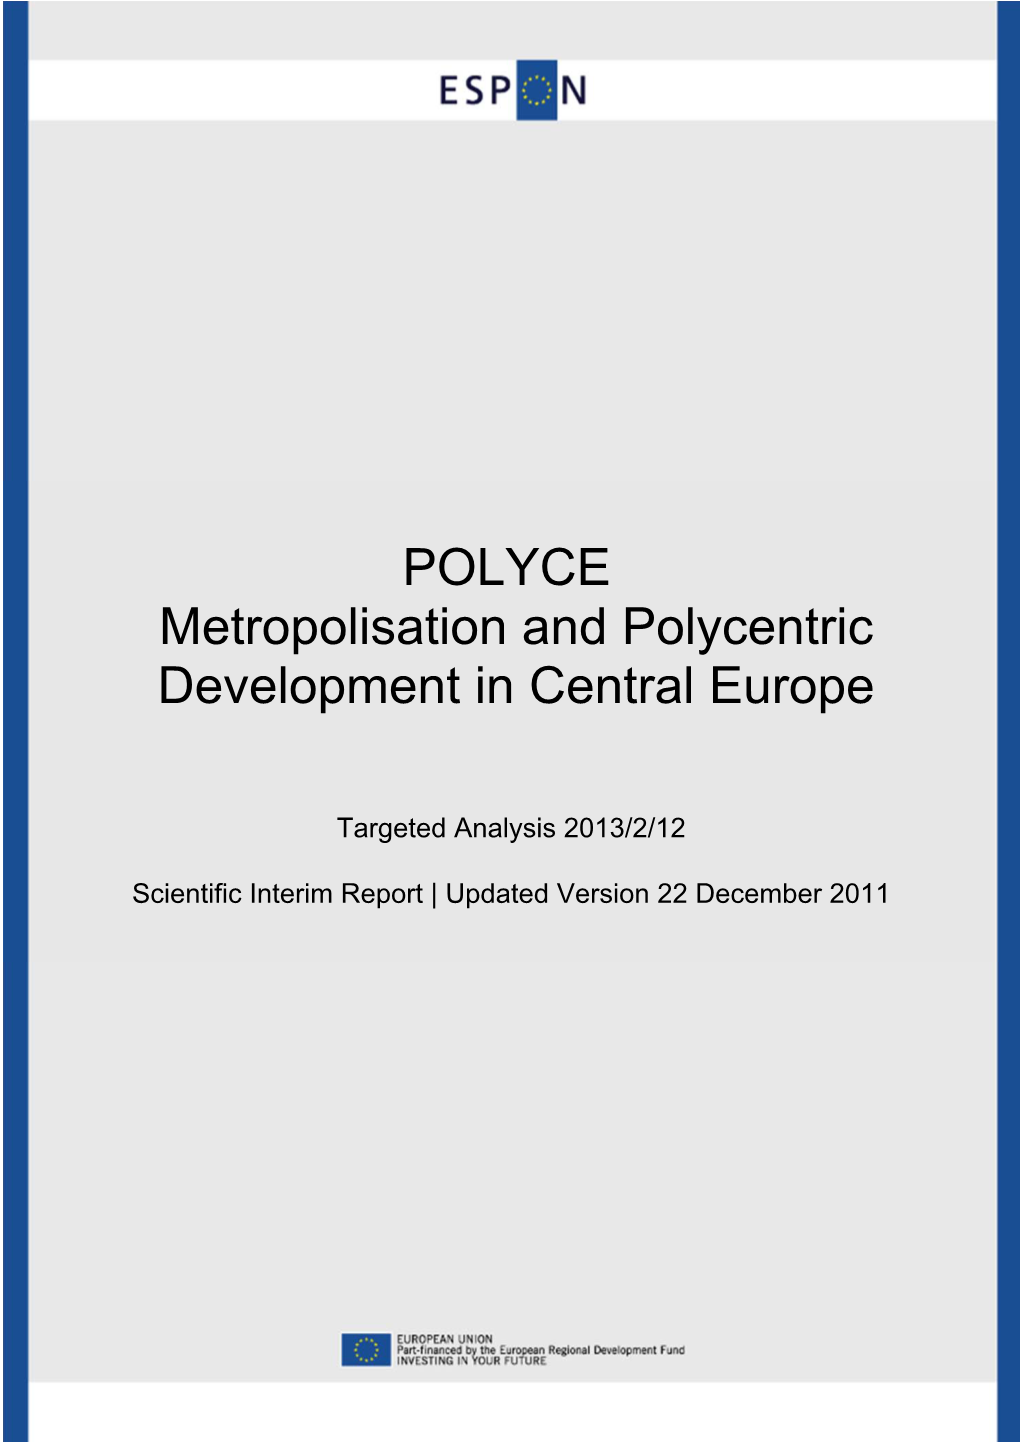 POLYCE Metropolisation and Polycentric Development in Central Europe